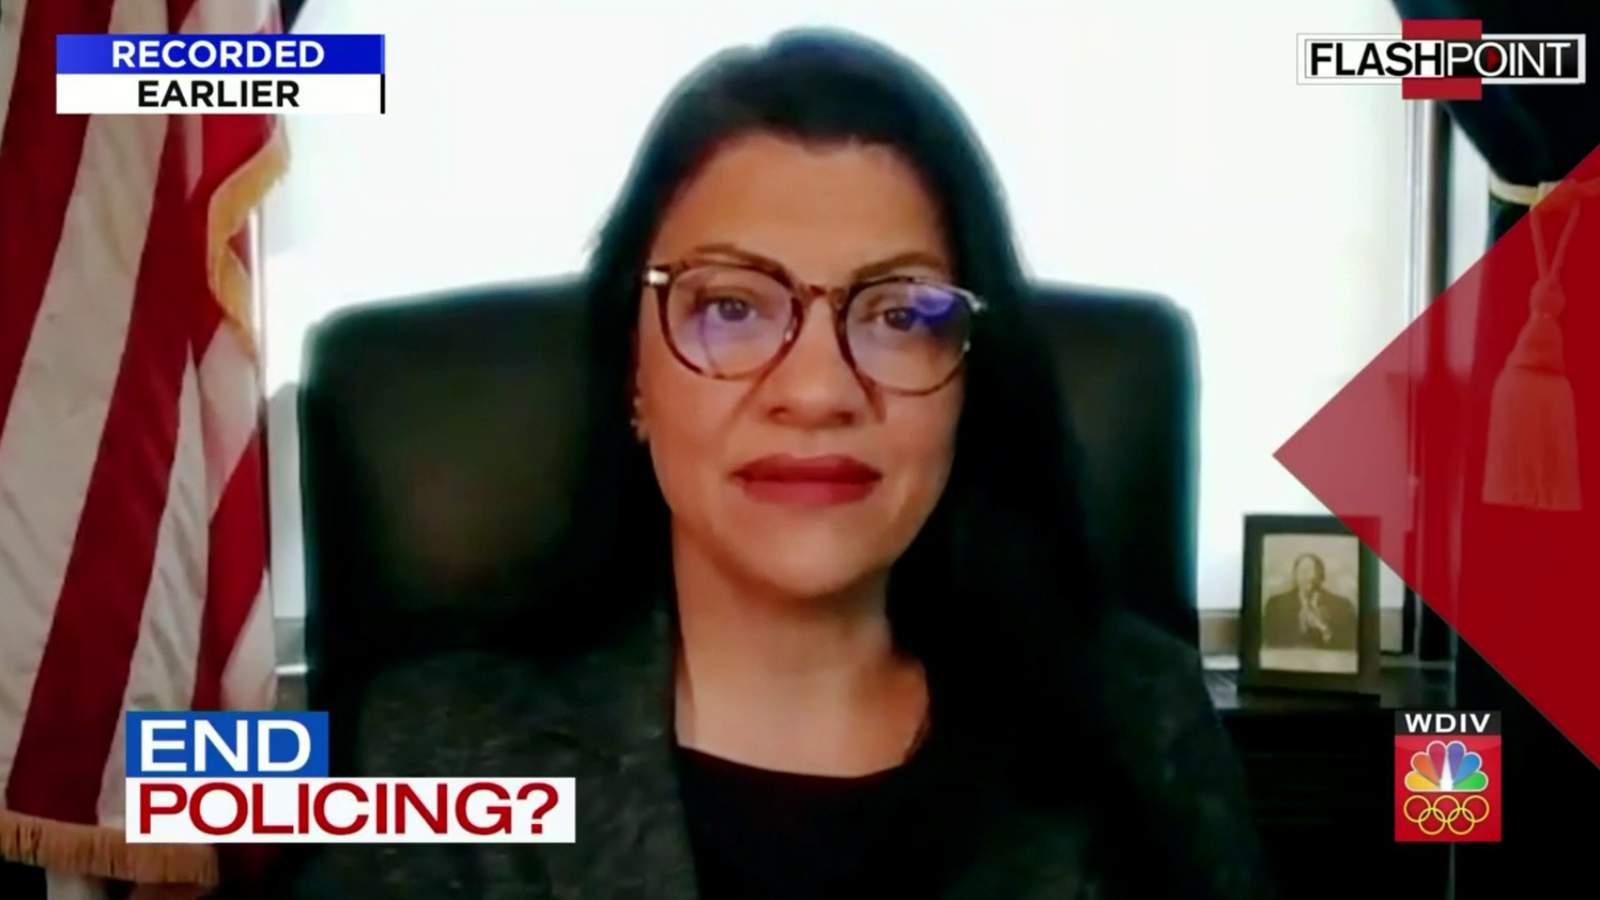 Flashpoint recap: Rep. Rashida Tlaib discusses controversial comments on policing that drew pushback from law enforcement officials